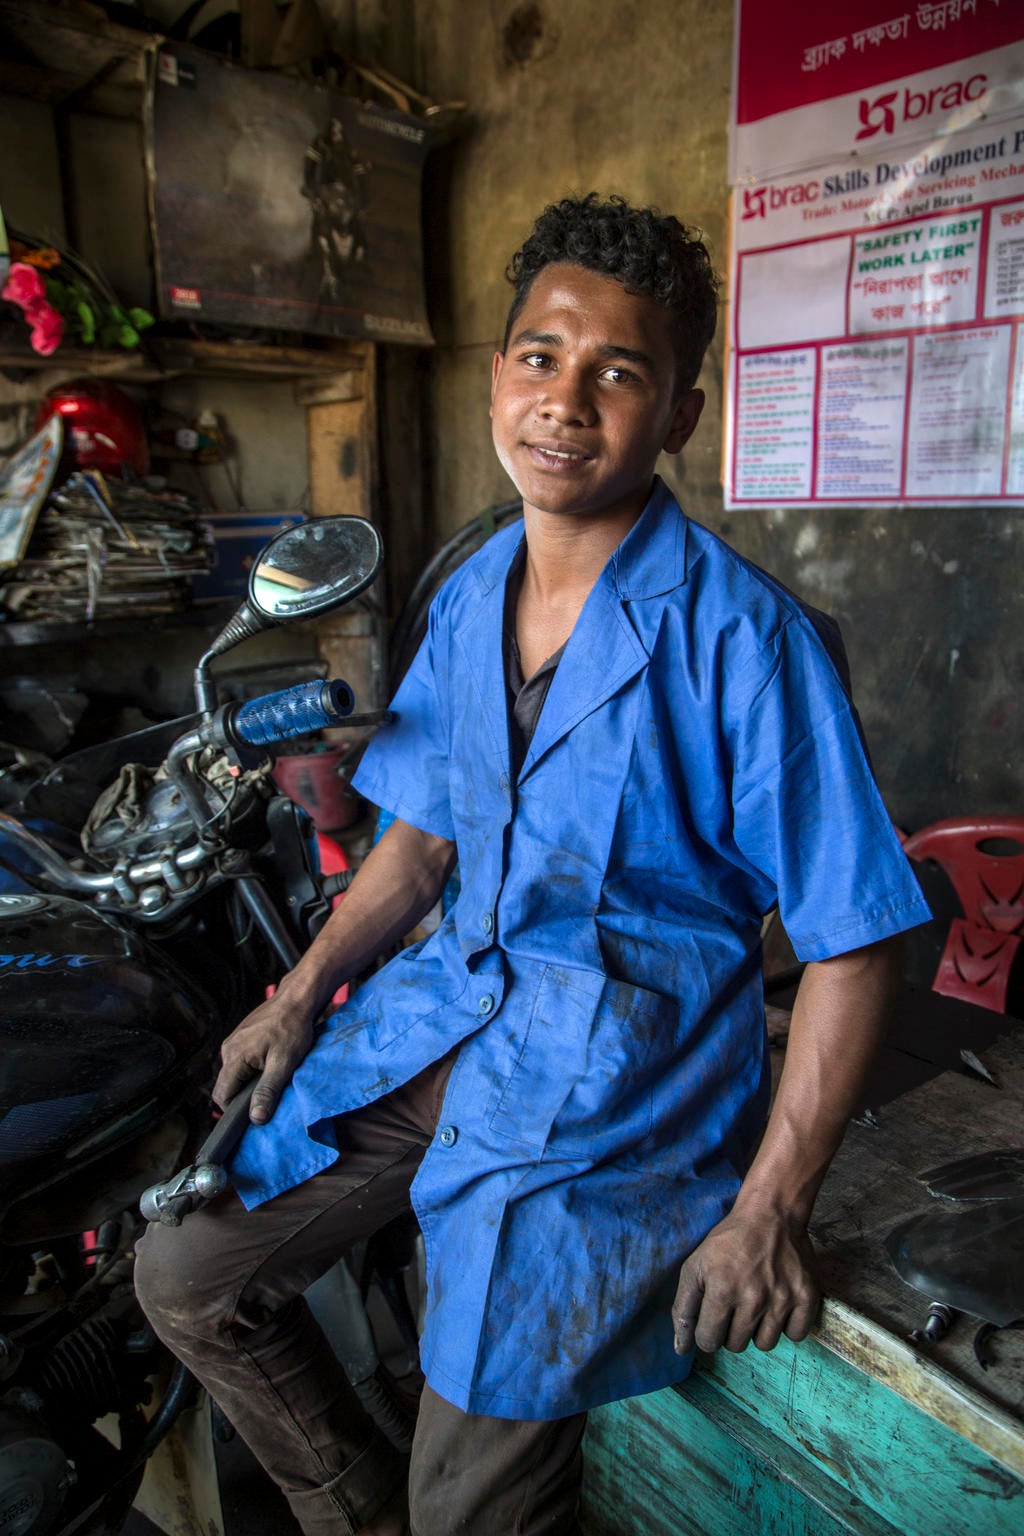 A young man smiles to a camera next to a motorbike. It looks like he is in a workshop.